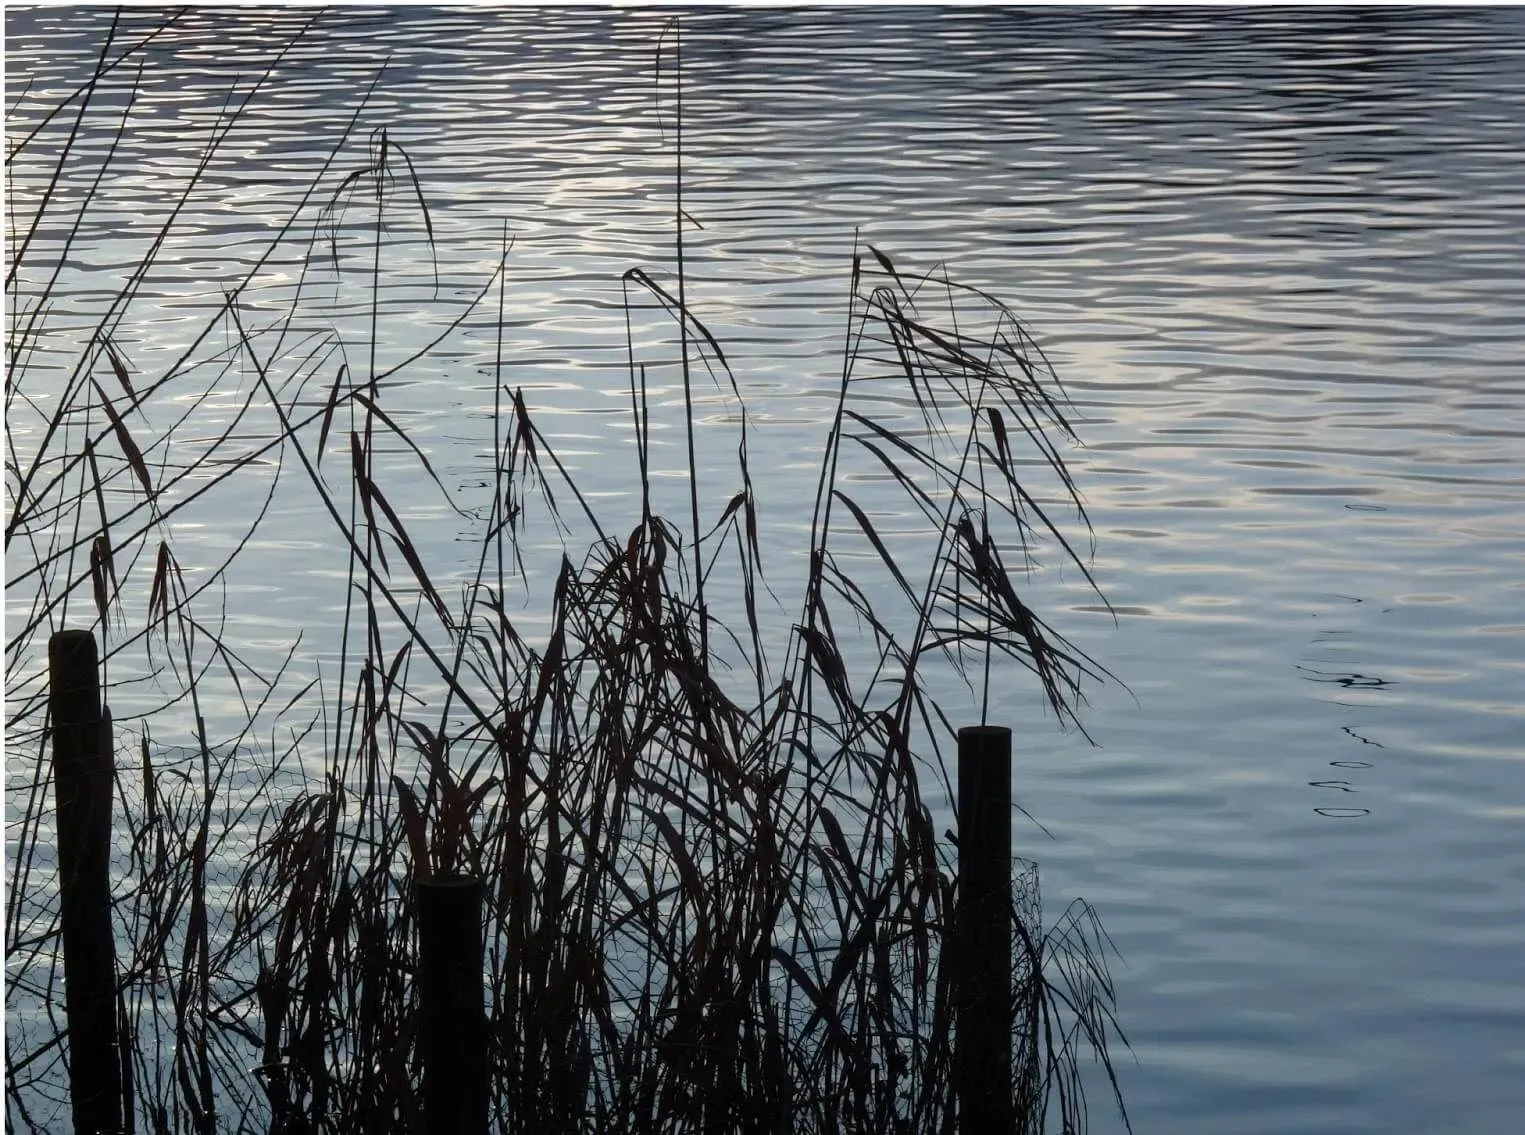 Reeds silhouetted against the lake at Needham Lake and Nature Reserve.